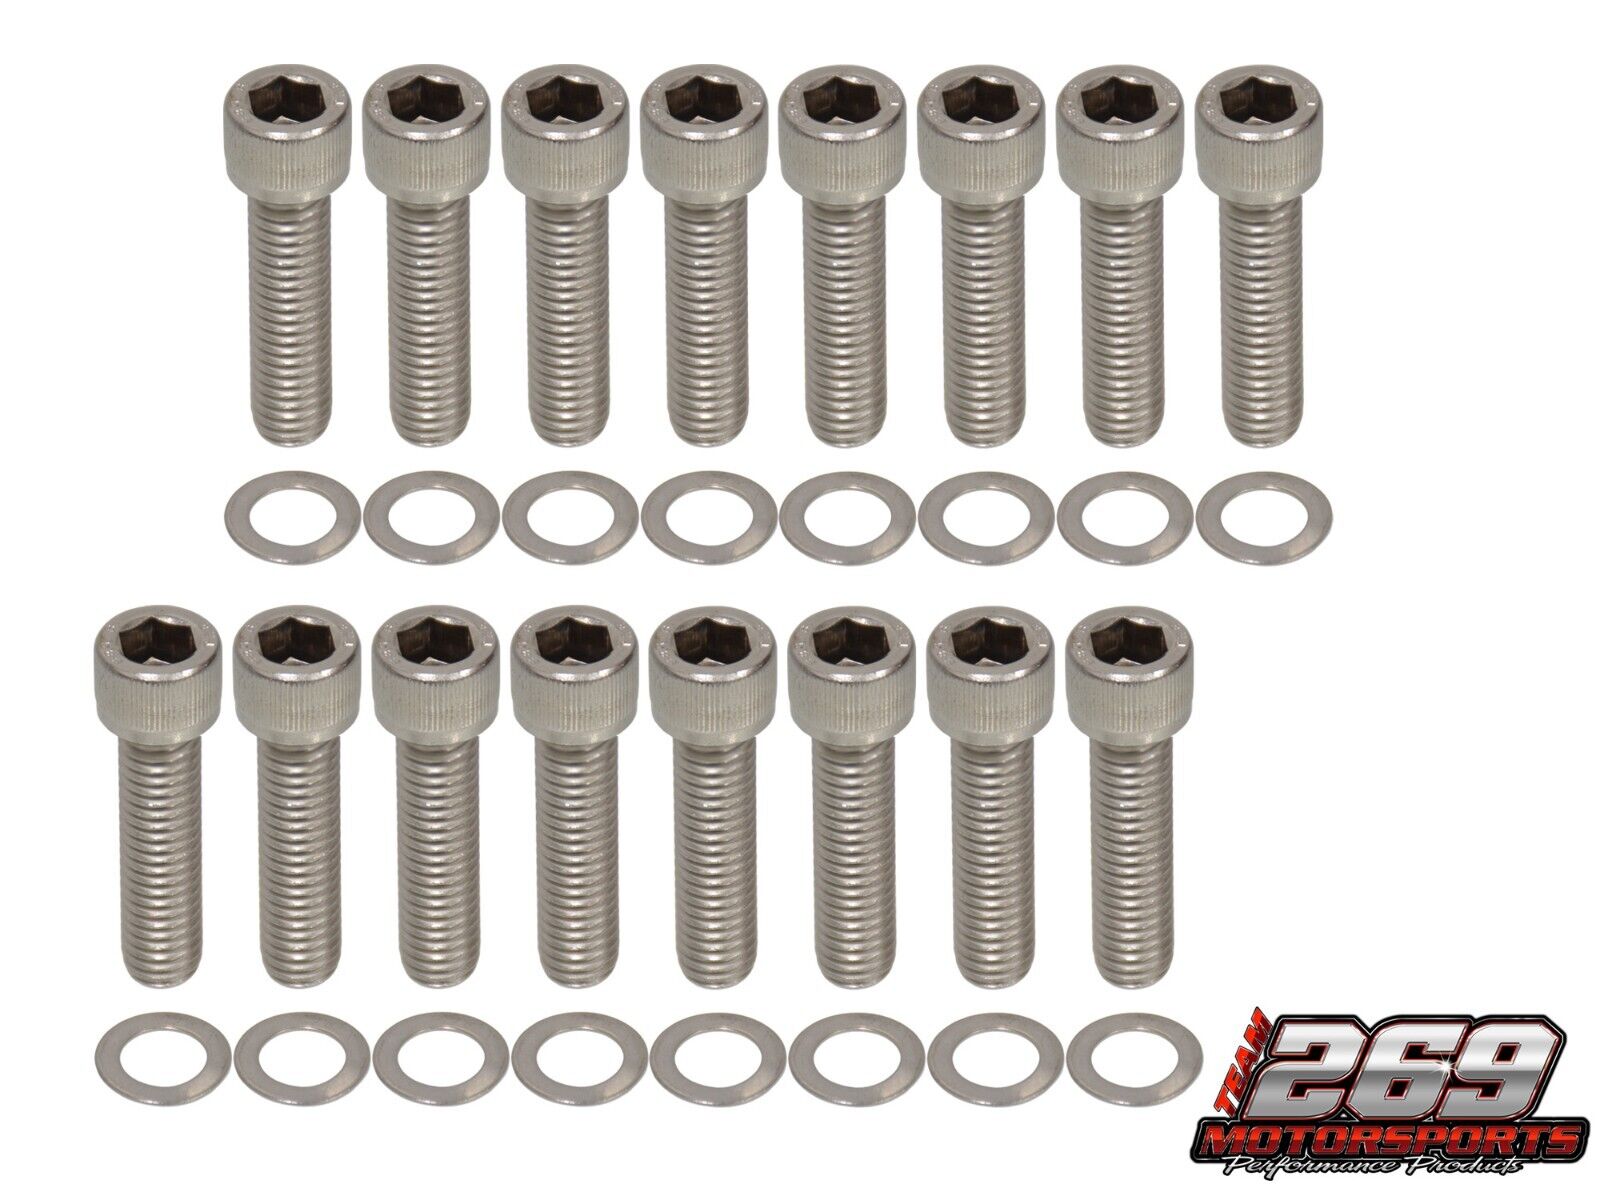 BBC INTAKE MANIFOLD BOLTS STAINLESS STEEL KIT GM 396 402 427 454 BIG BLOCK CHEVY